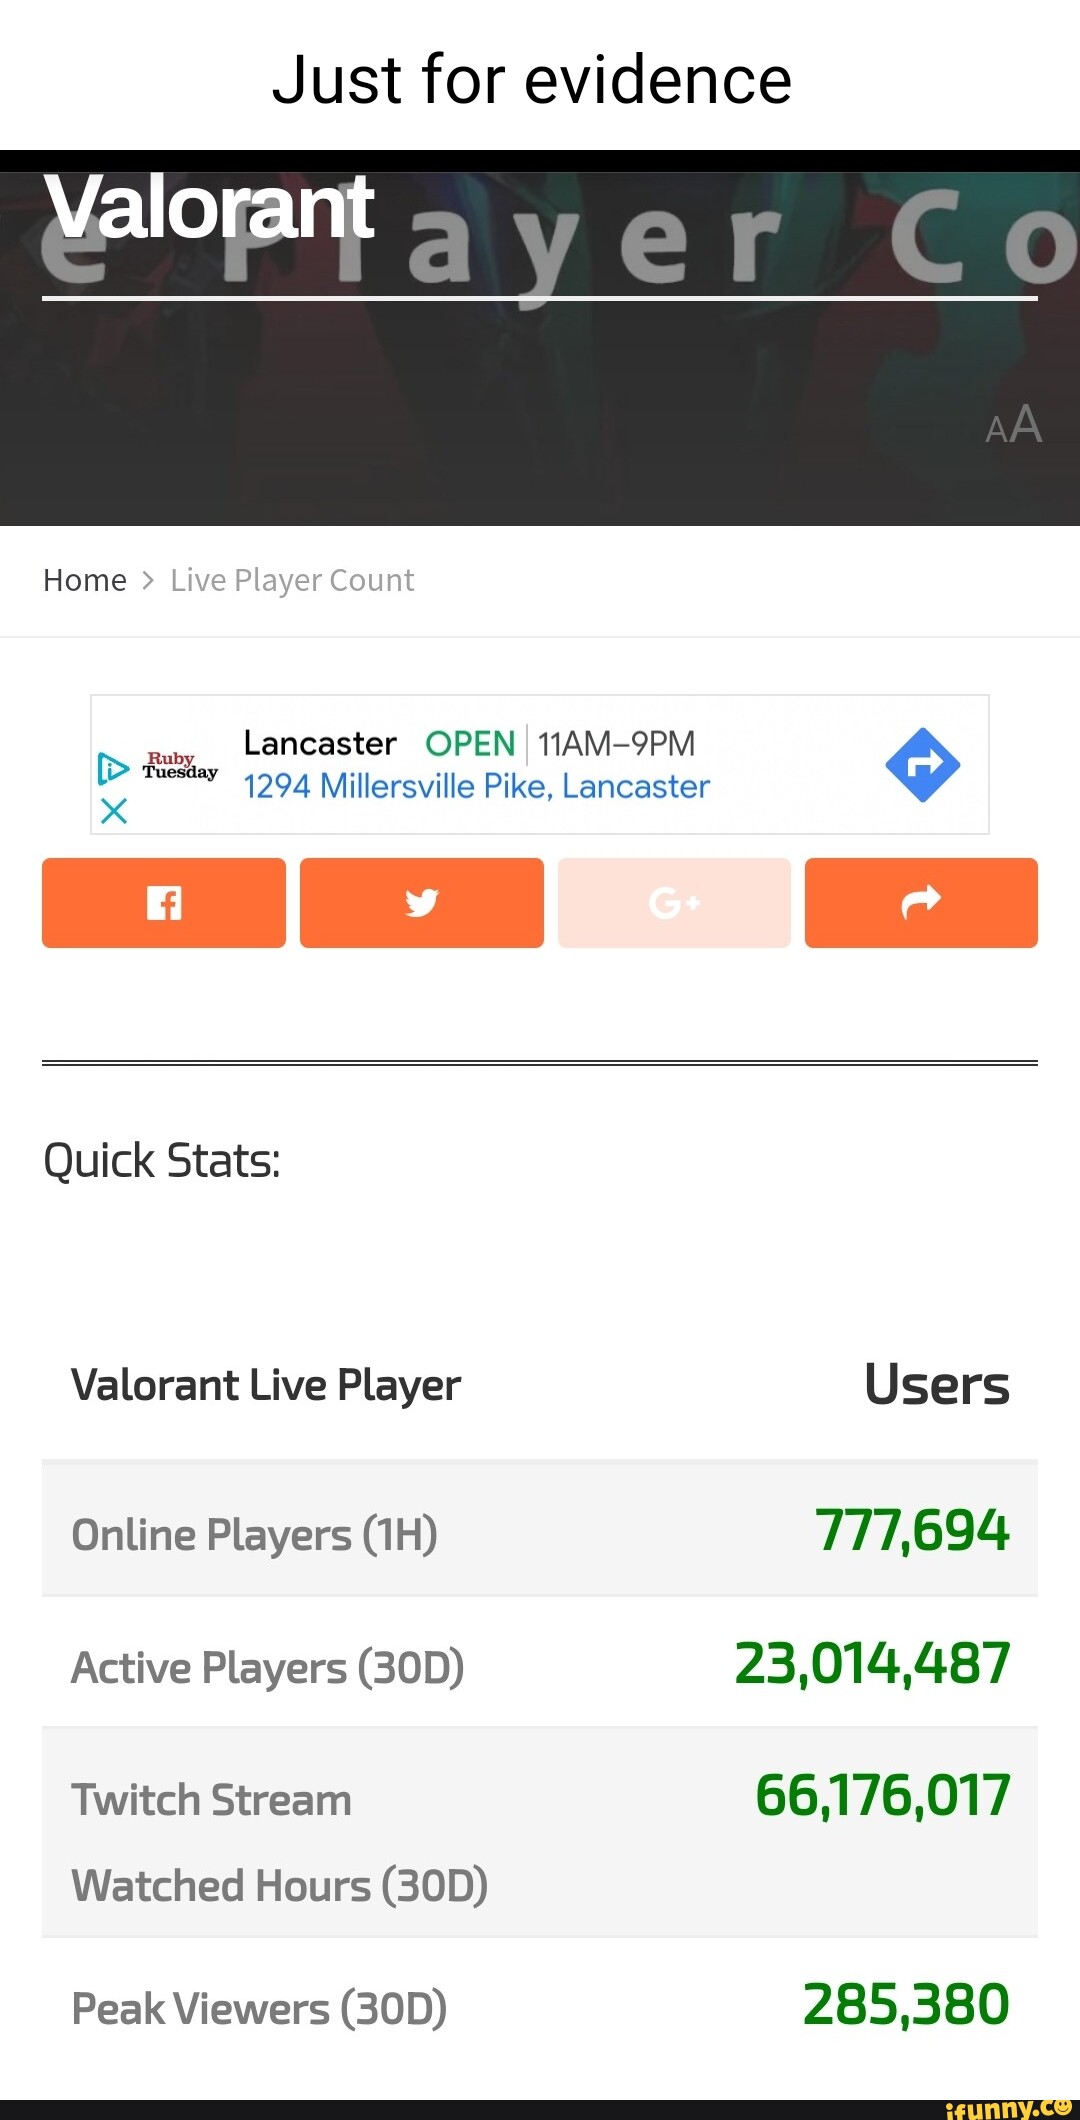 Where can I look for an active player count for an online